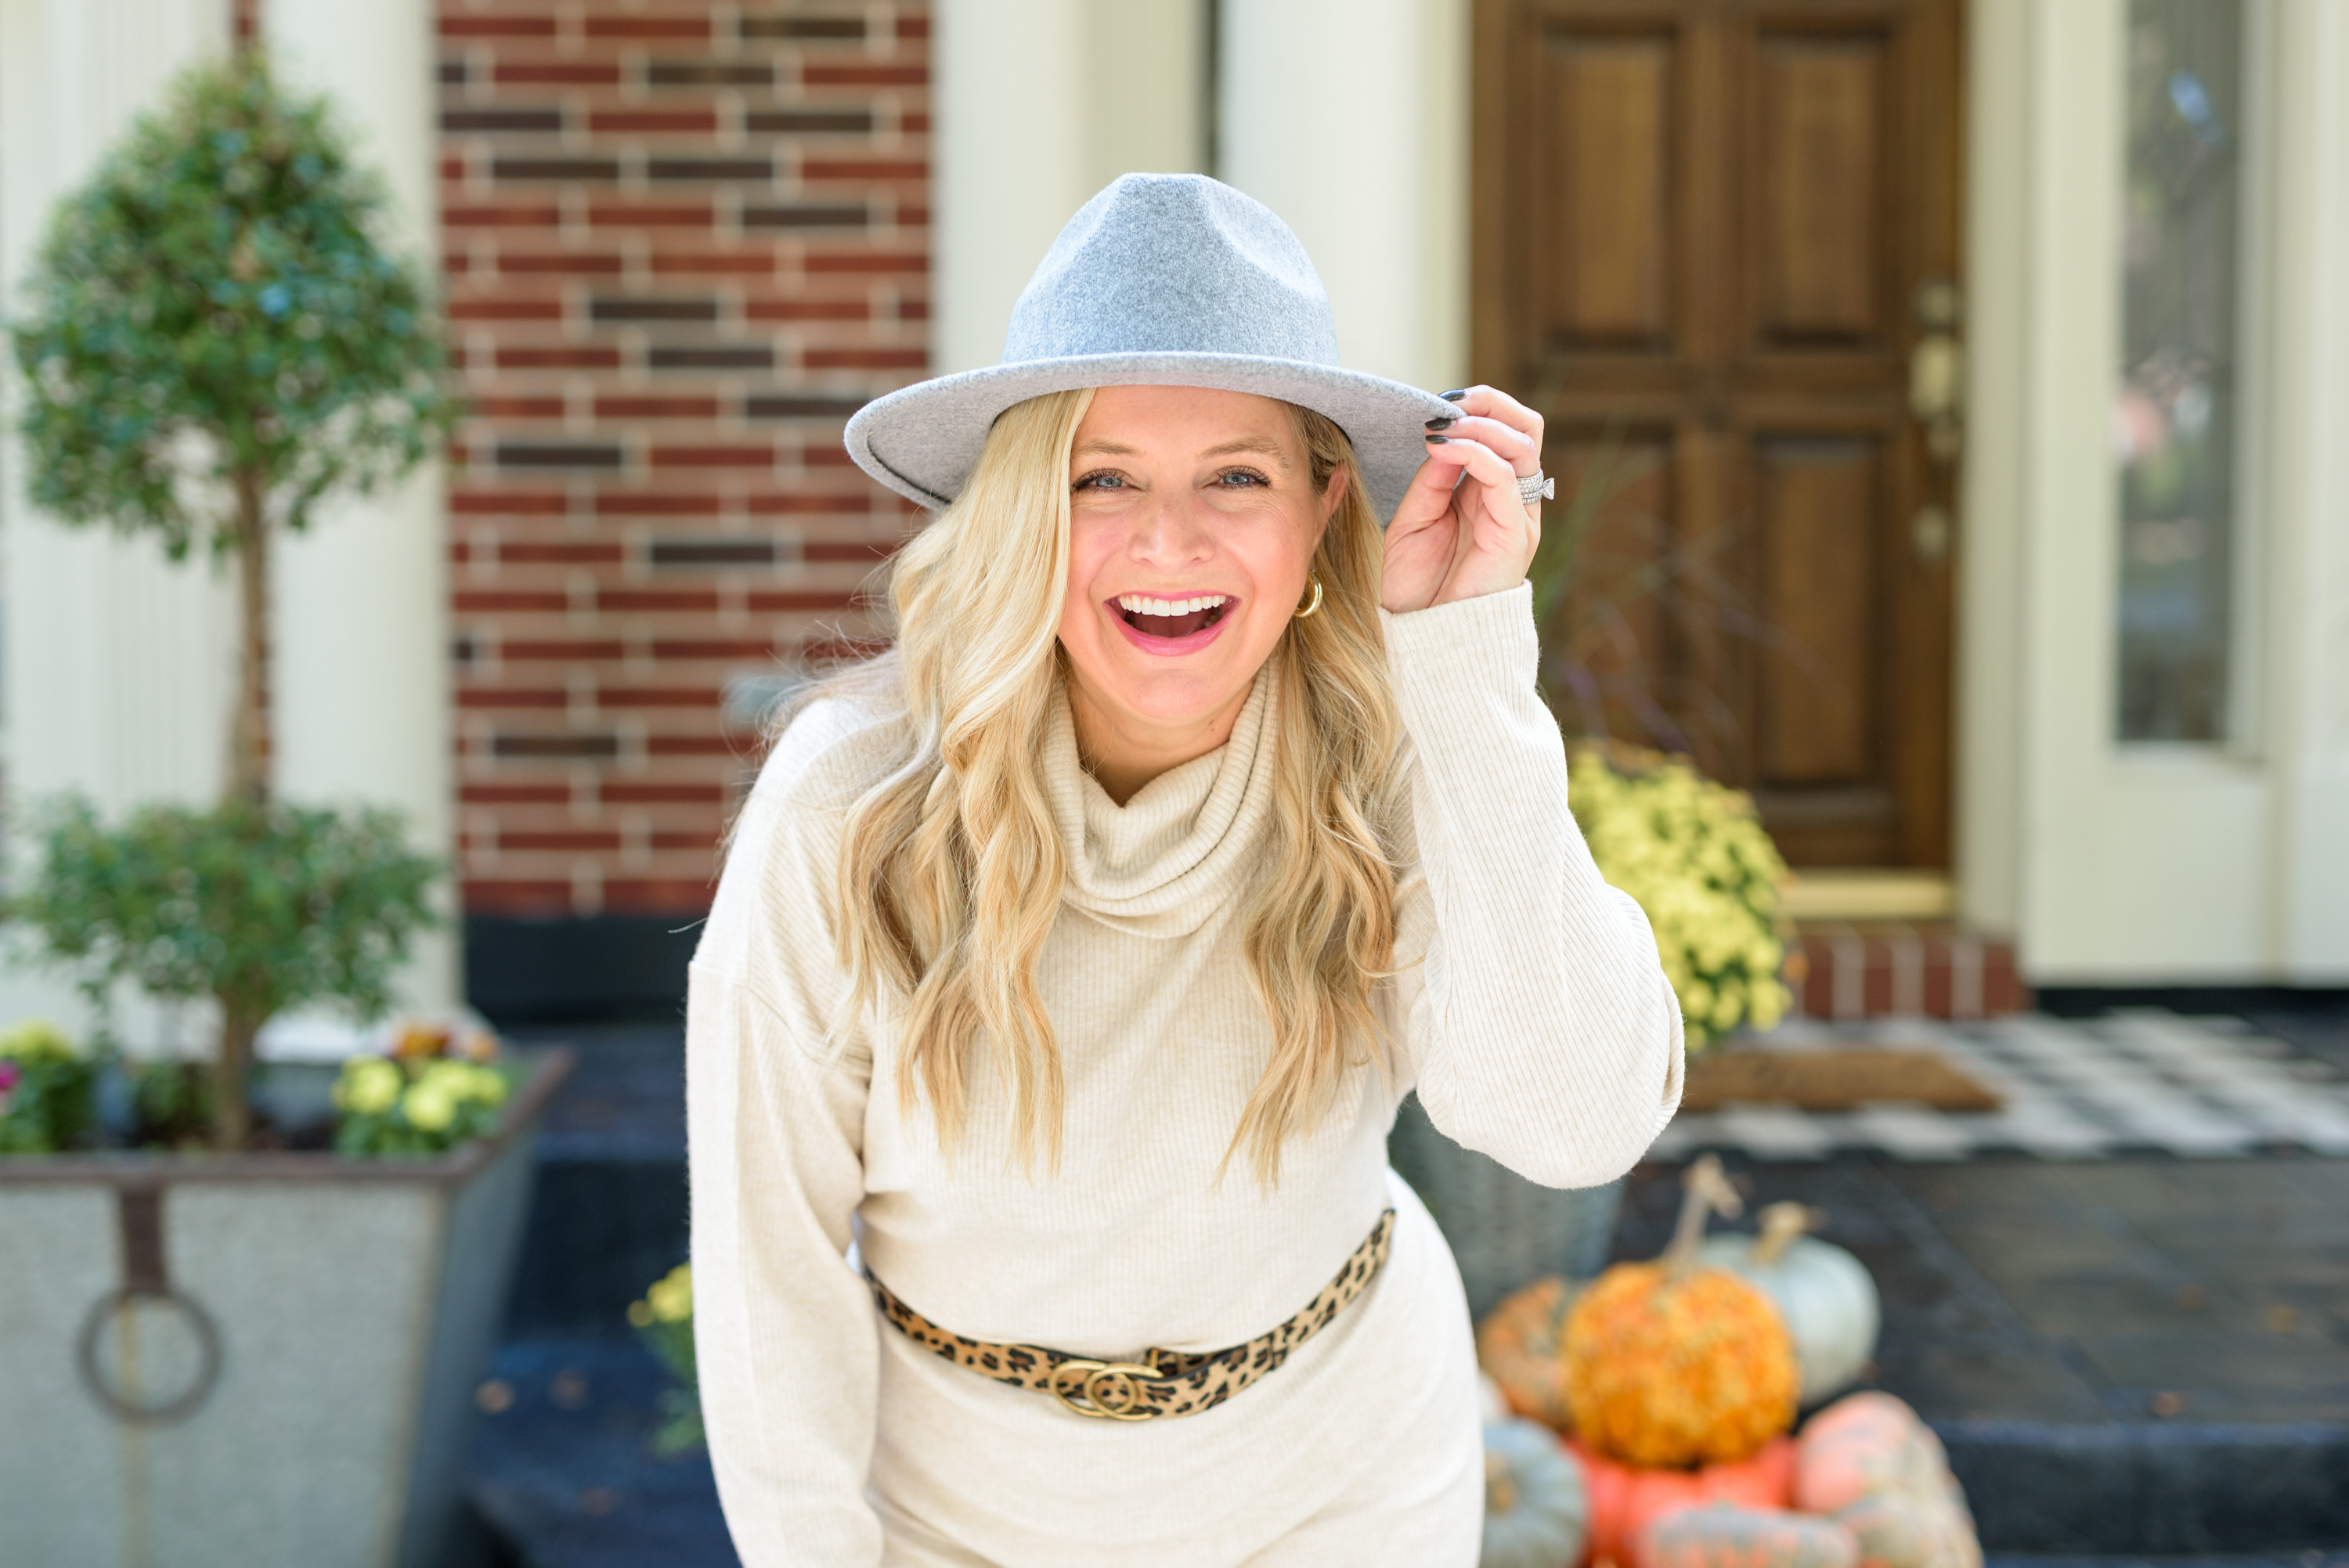 Fall Clothing by popular Houston fashion blog, Fancy Ashley: image of a woman wearing a Walmart Time and Tru Women's Cowlneck Dress,Scoop Alexandra Women’s Over the Knee Heeled Boots,Time and Tru Women's Chenille Fedora with Braided Trim, and Walmart Women Leopard Print Leather Belt with Alloy Buckle.